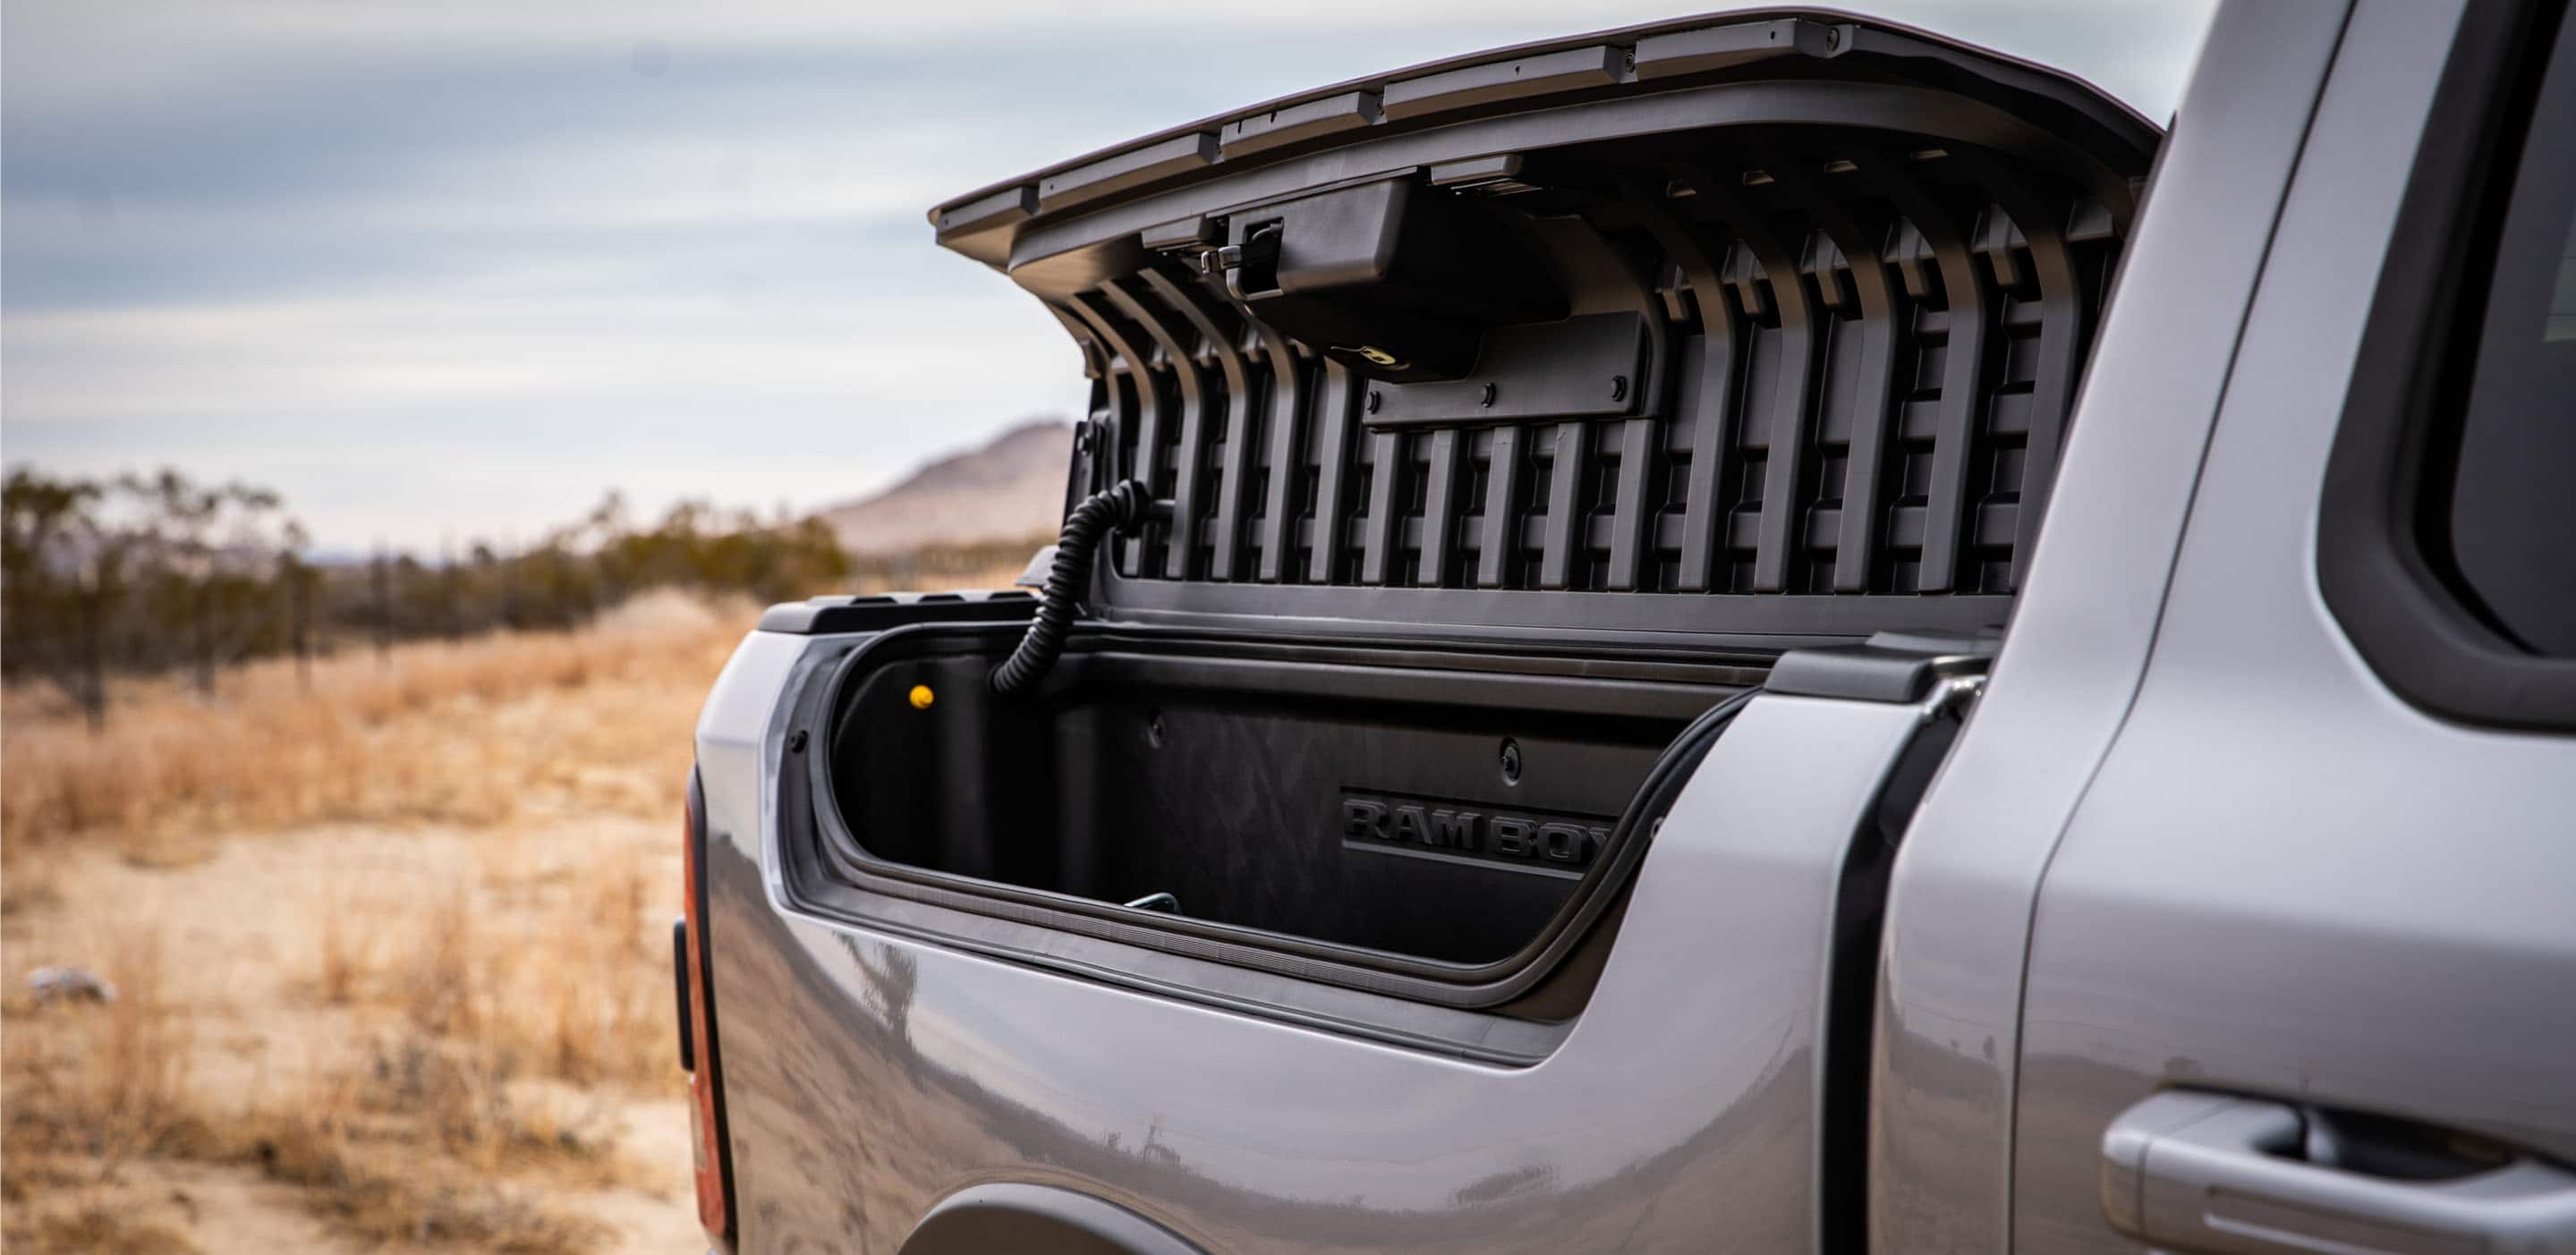 The RamBox Cargo Management System on the side of the truck bed of the 2023 Ram 1500.